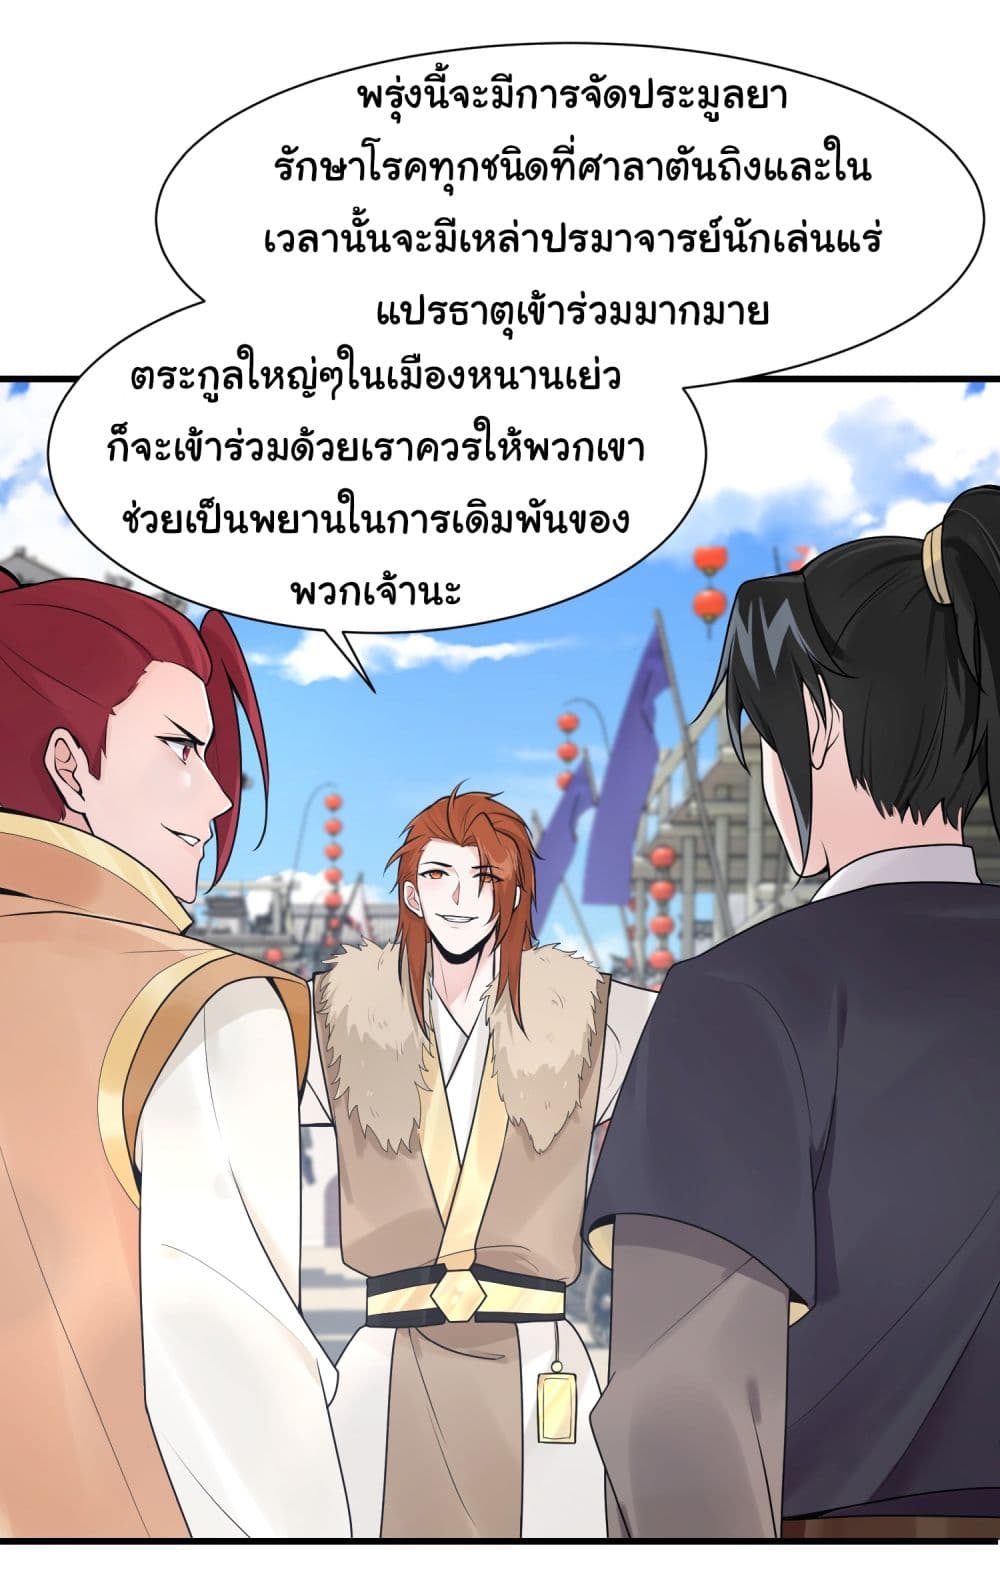 Rebirth of an Immortal Cultivator from 10,000 years ago ตอนที่ 9 (11)